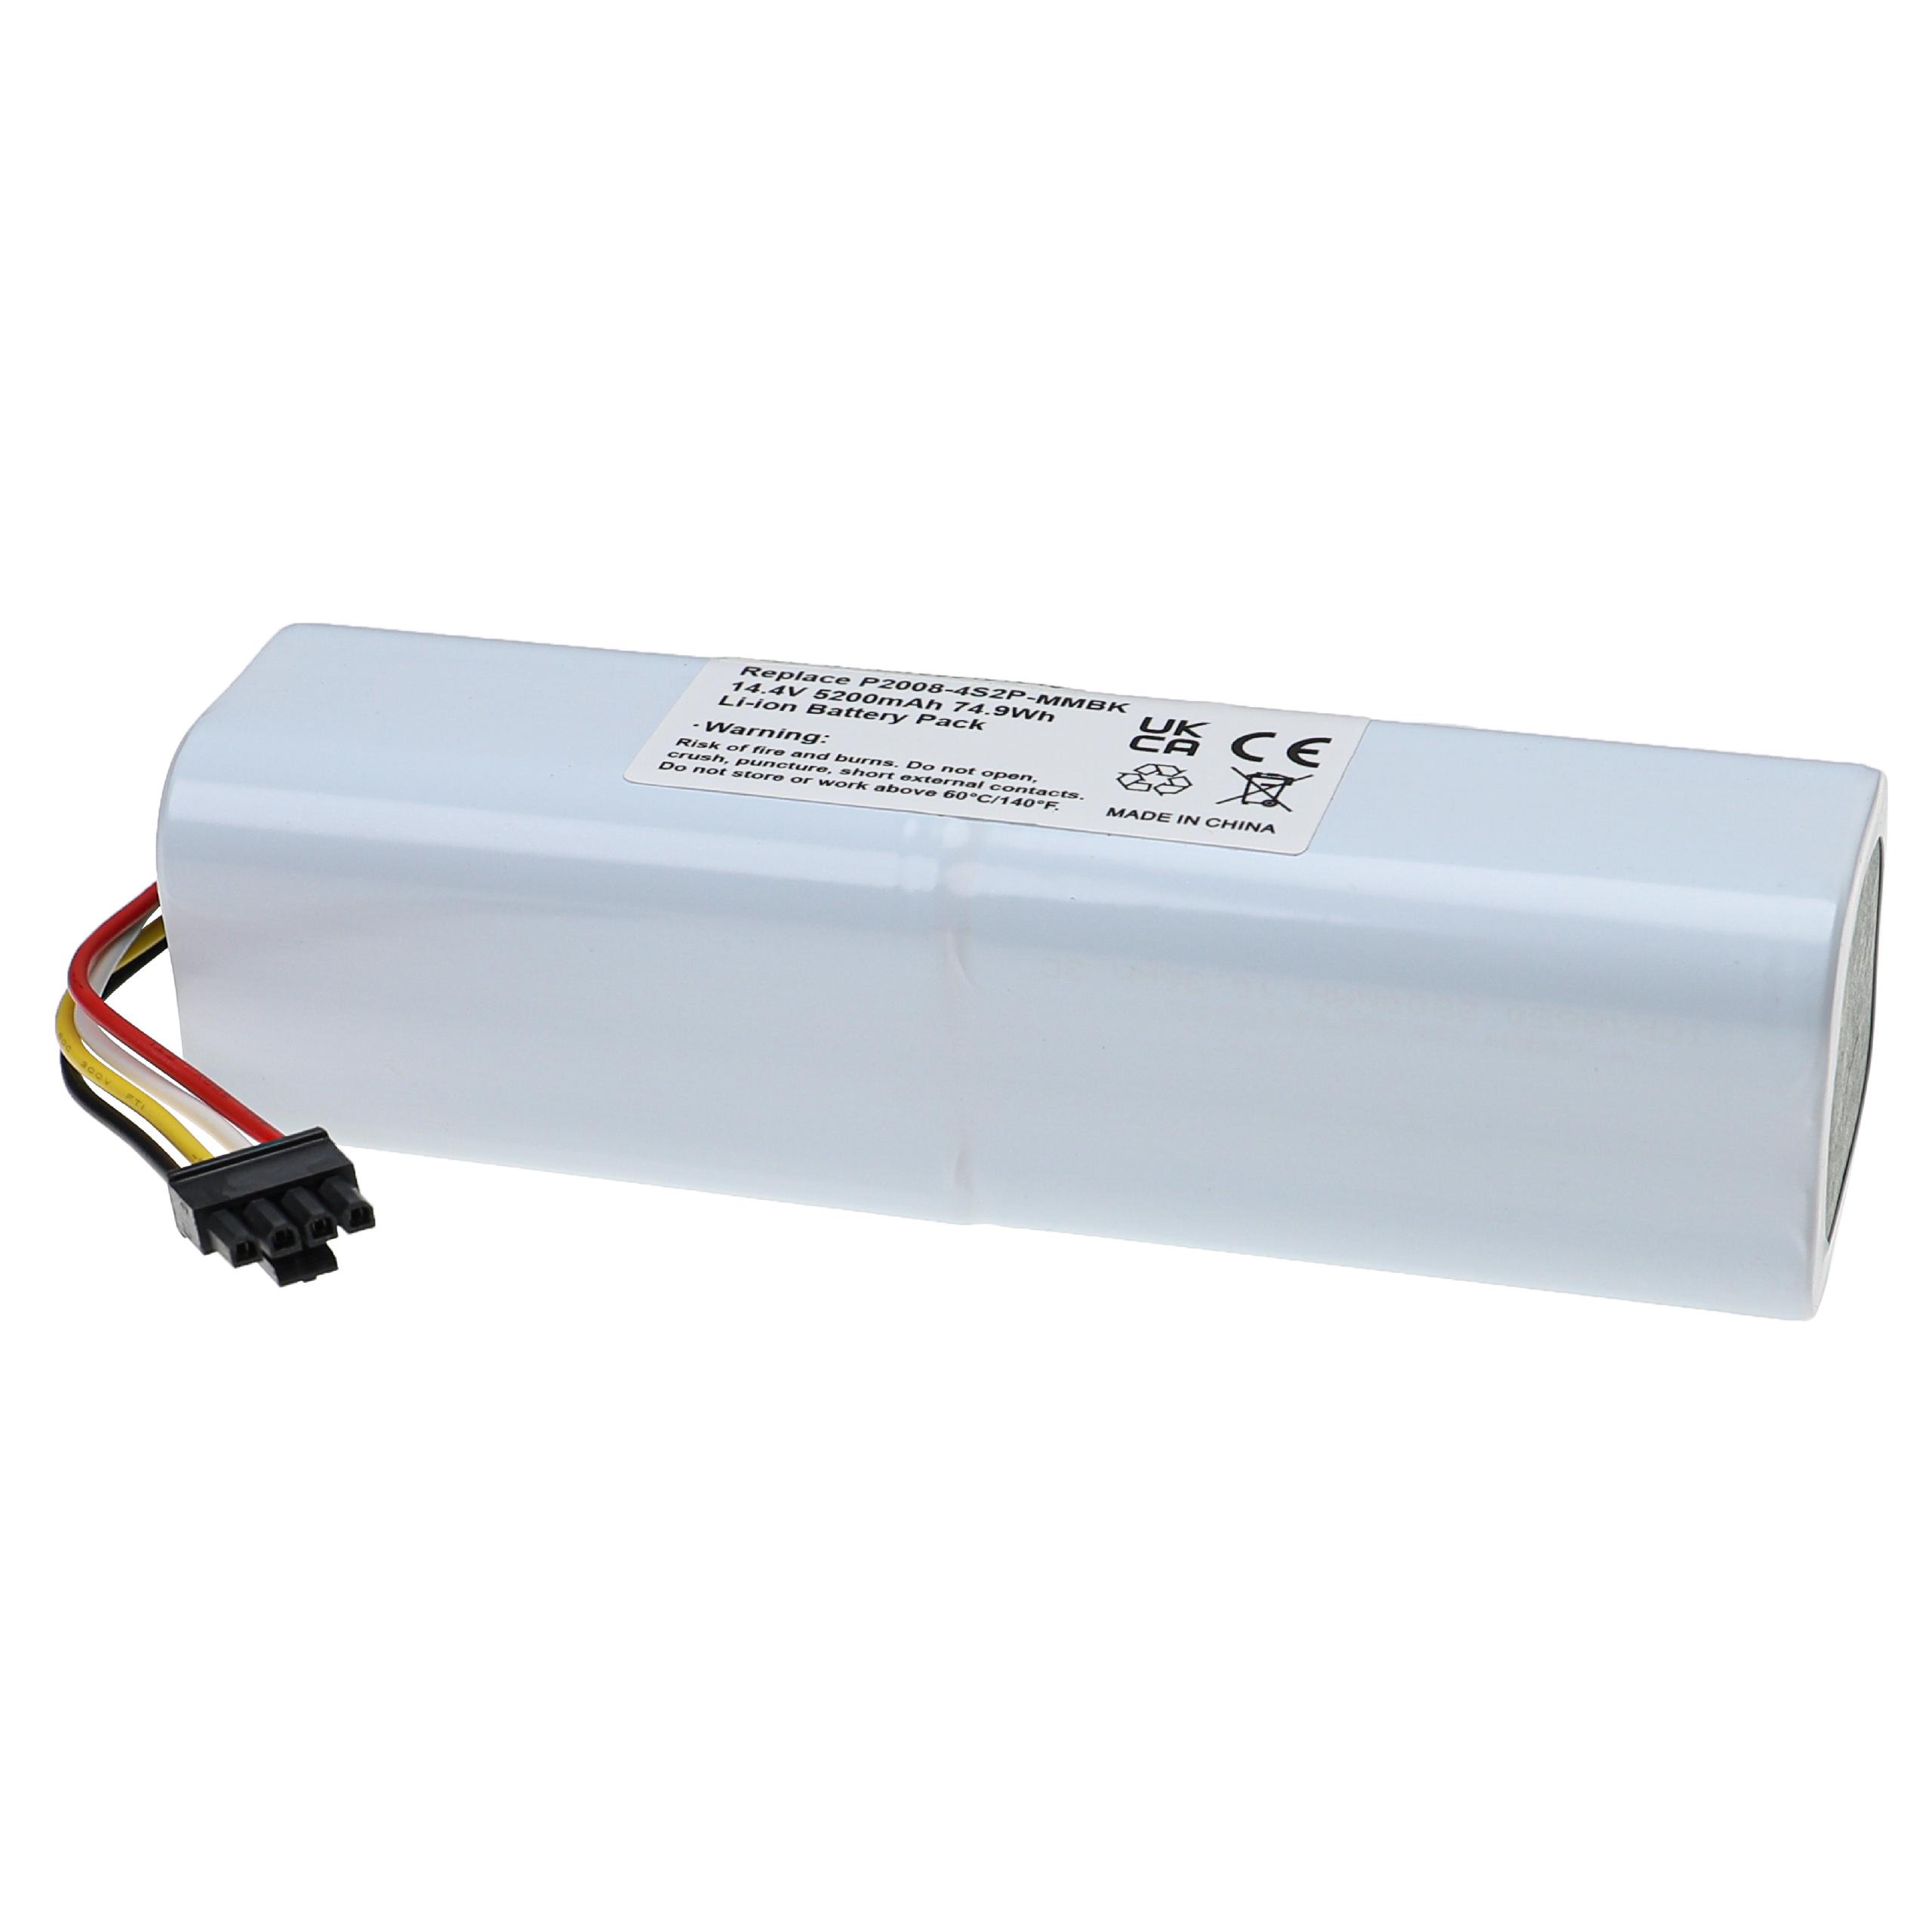 Battery Replacement for Xiaomi P2008-4S2P-MMBK for - 5200mAh, 14.4V, Li-Ion